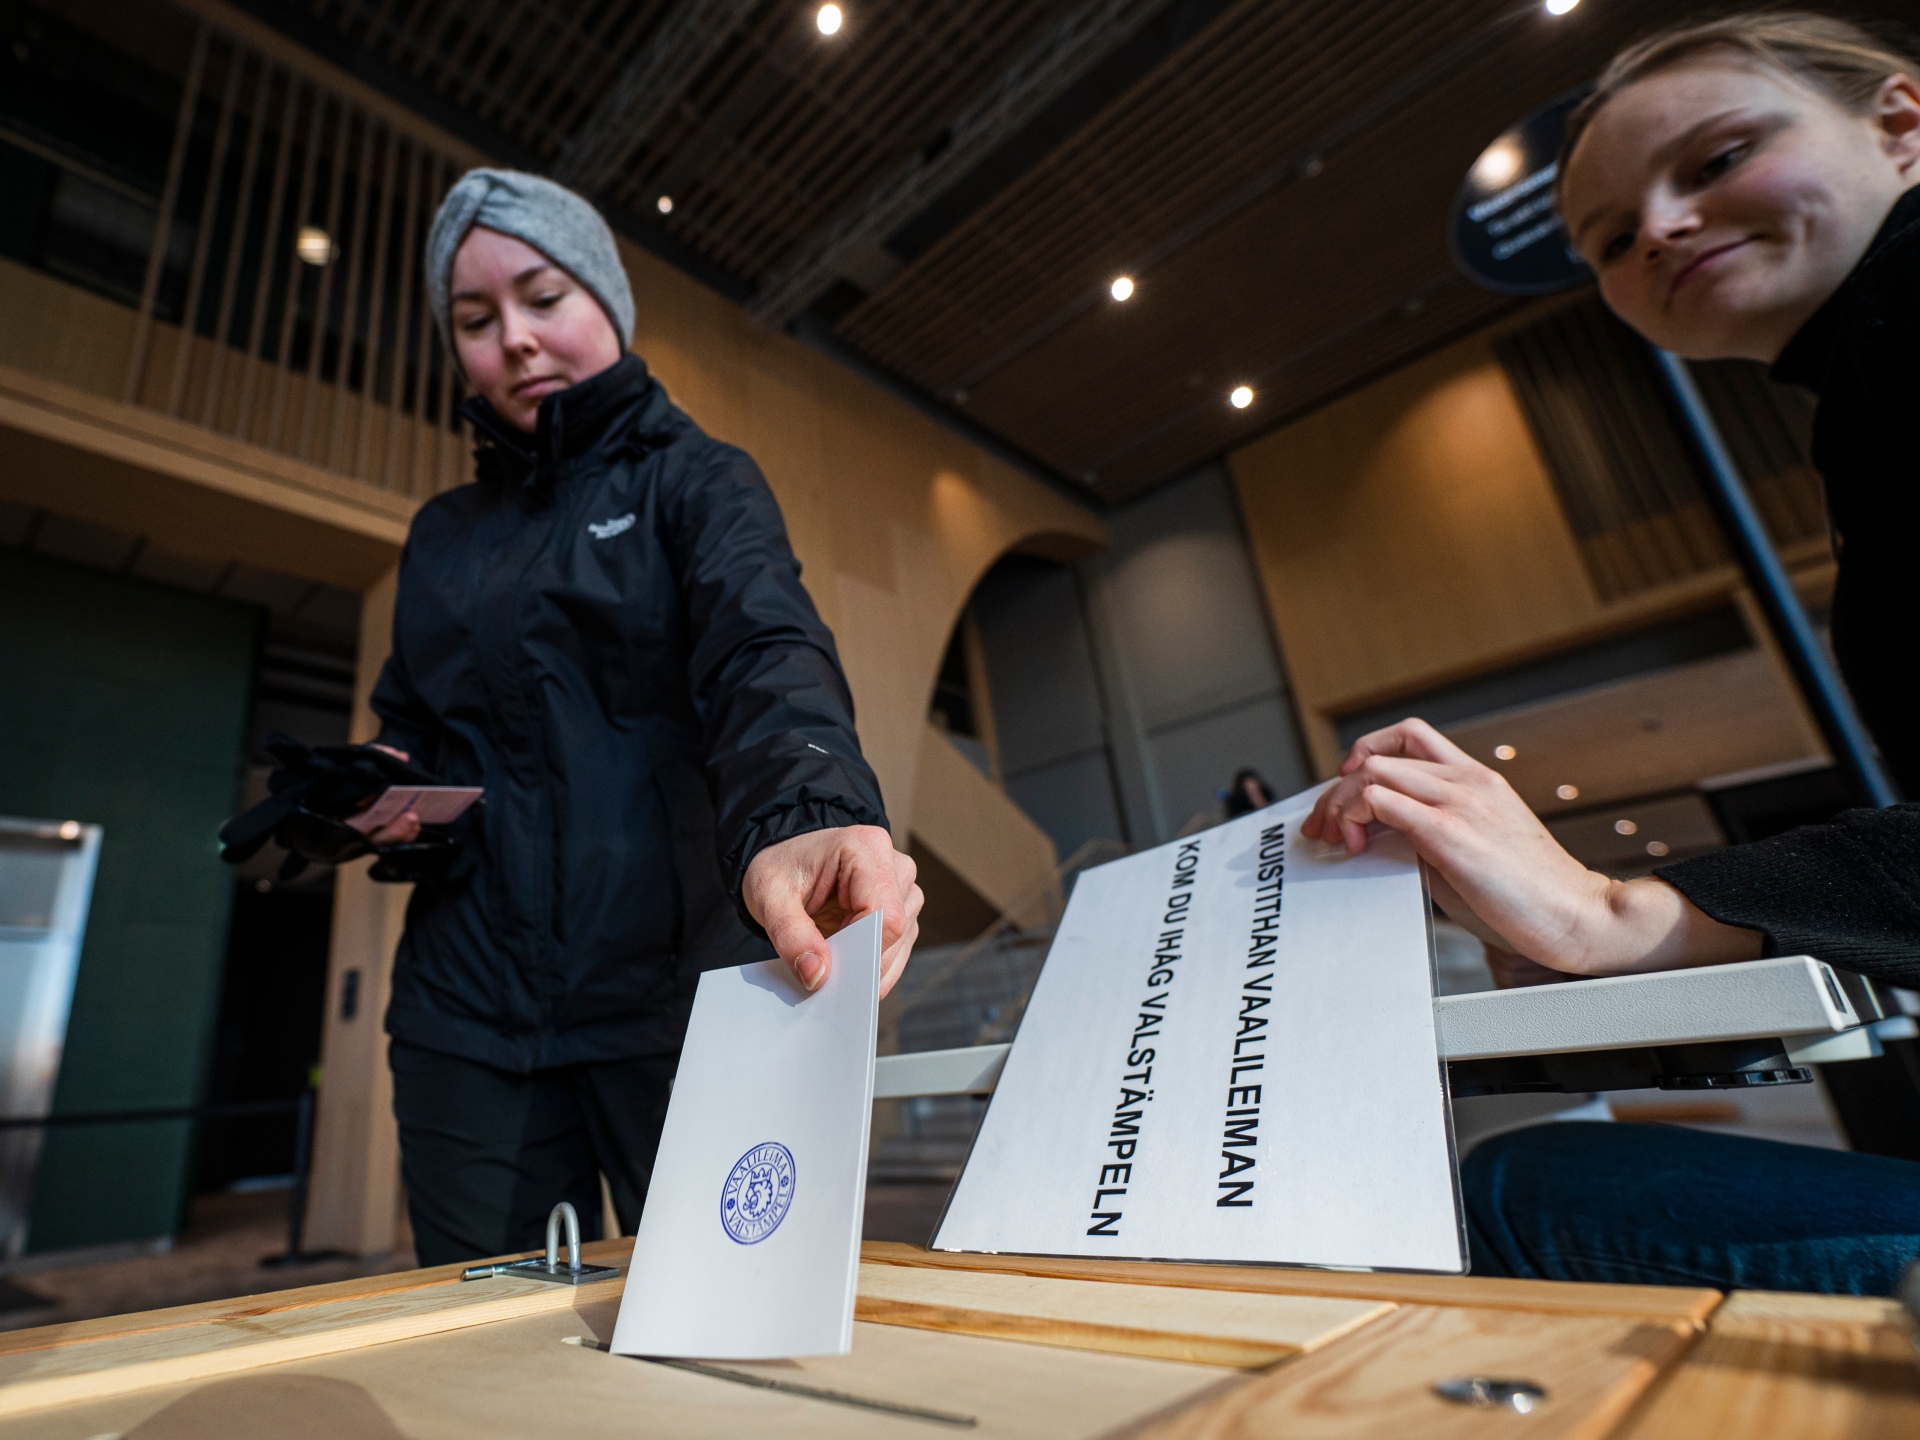 Finland’s young leader seeks re-election in tight race